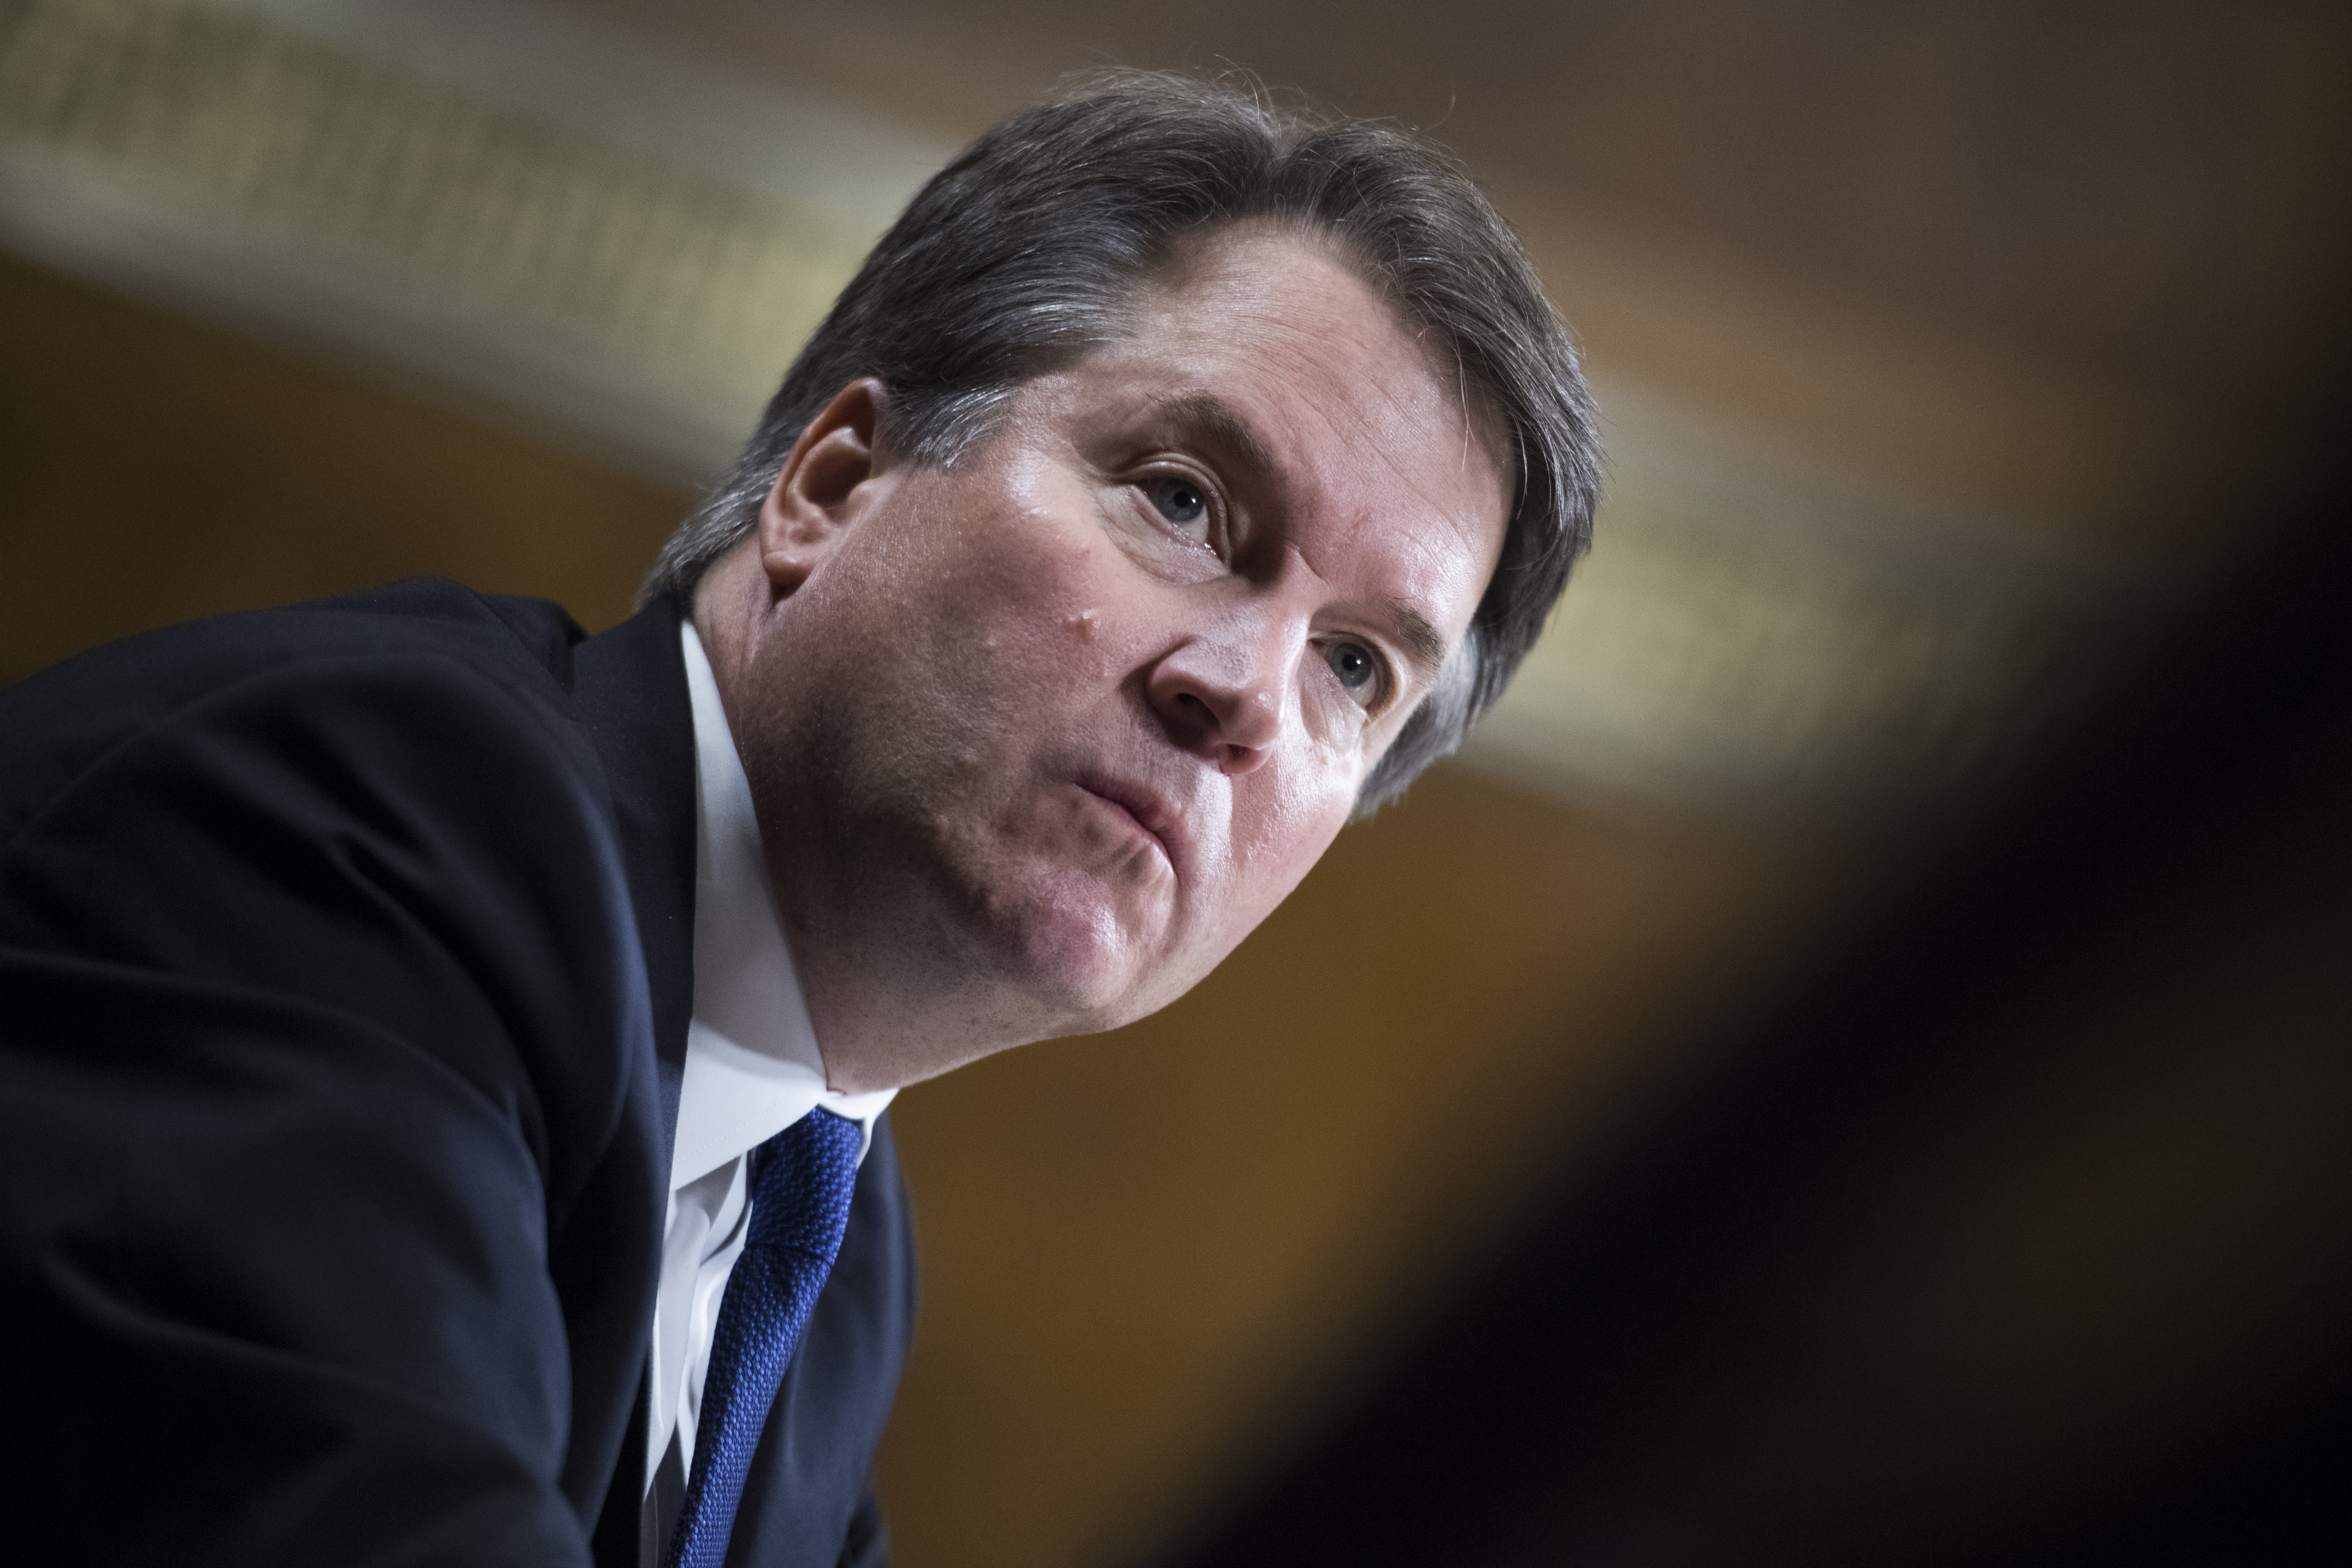 Justice Brett Kavanaugh testifies before the Senate Judiciary Committee about allegations of sexual assault from Christine Blasey Ford. (Tom Williams/Pool/Getty Images)